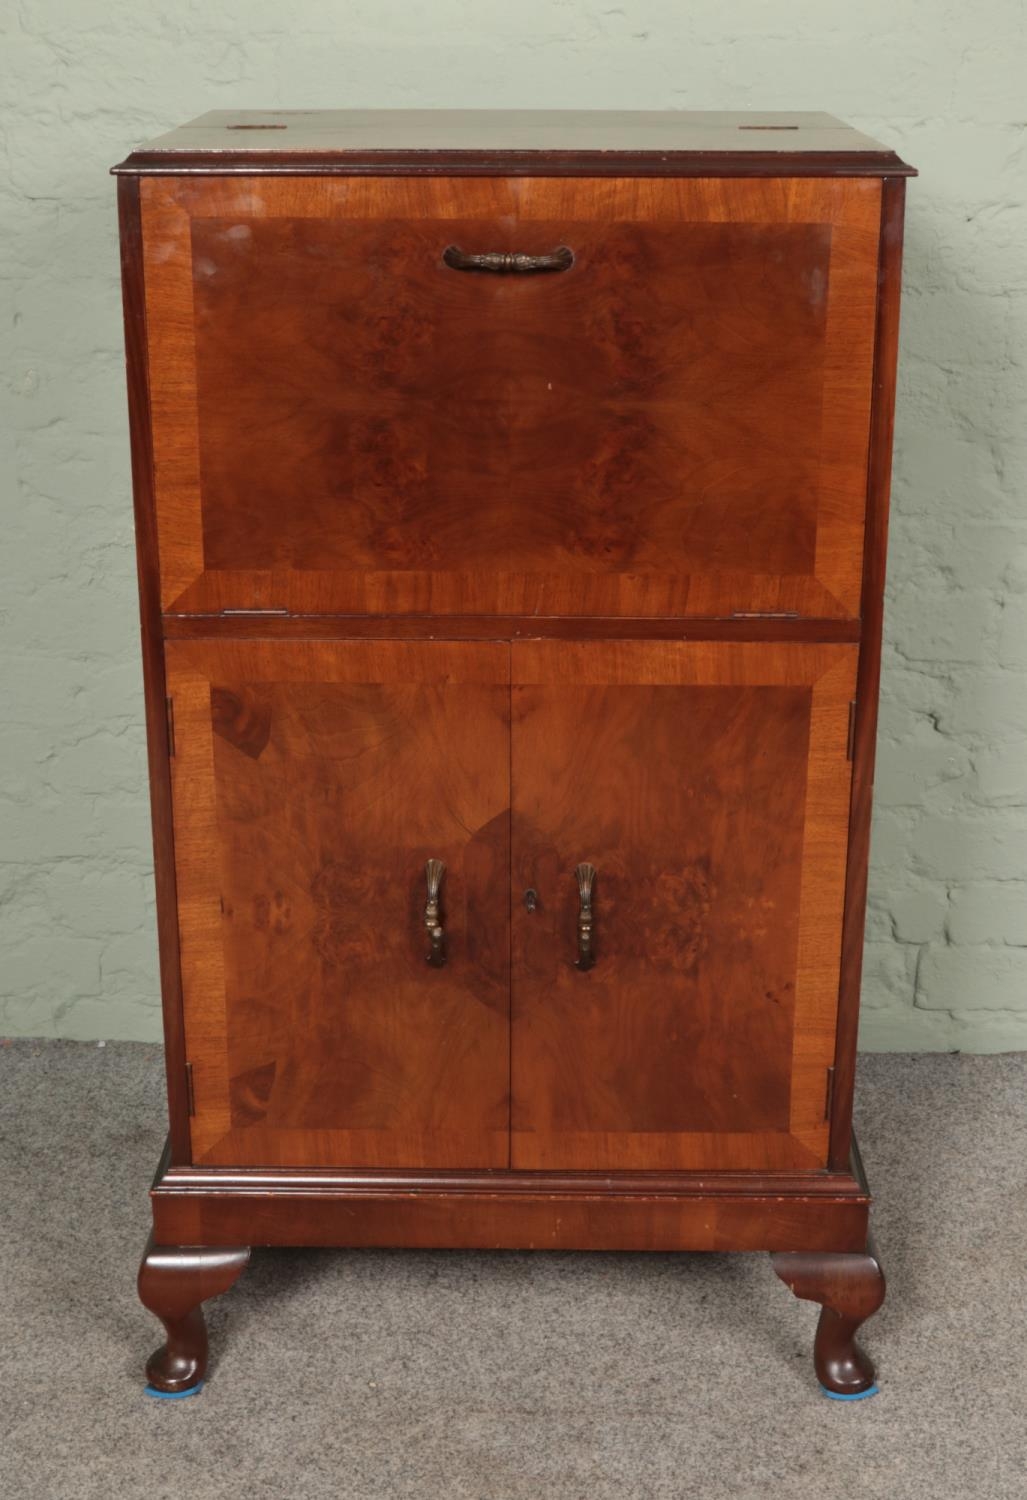 A vintage Cocktail cabinet with mirrored interior